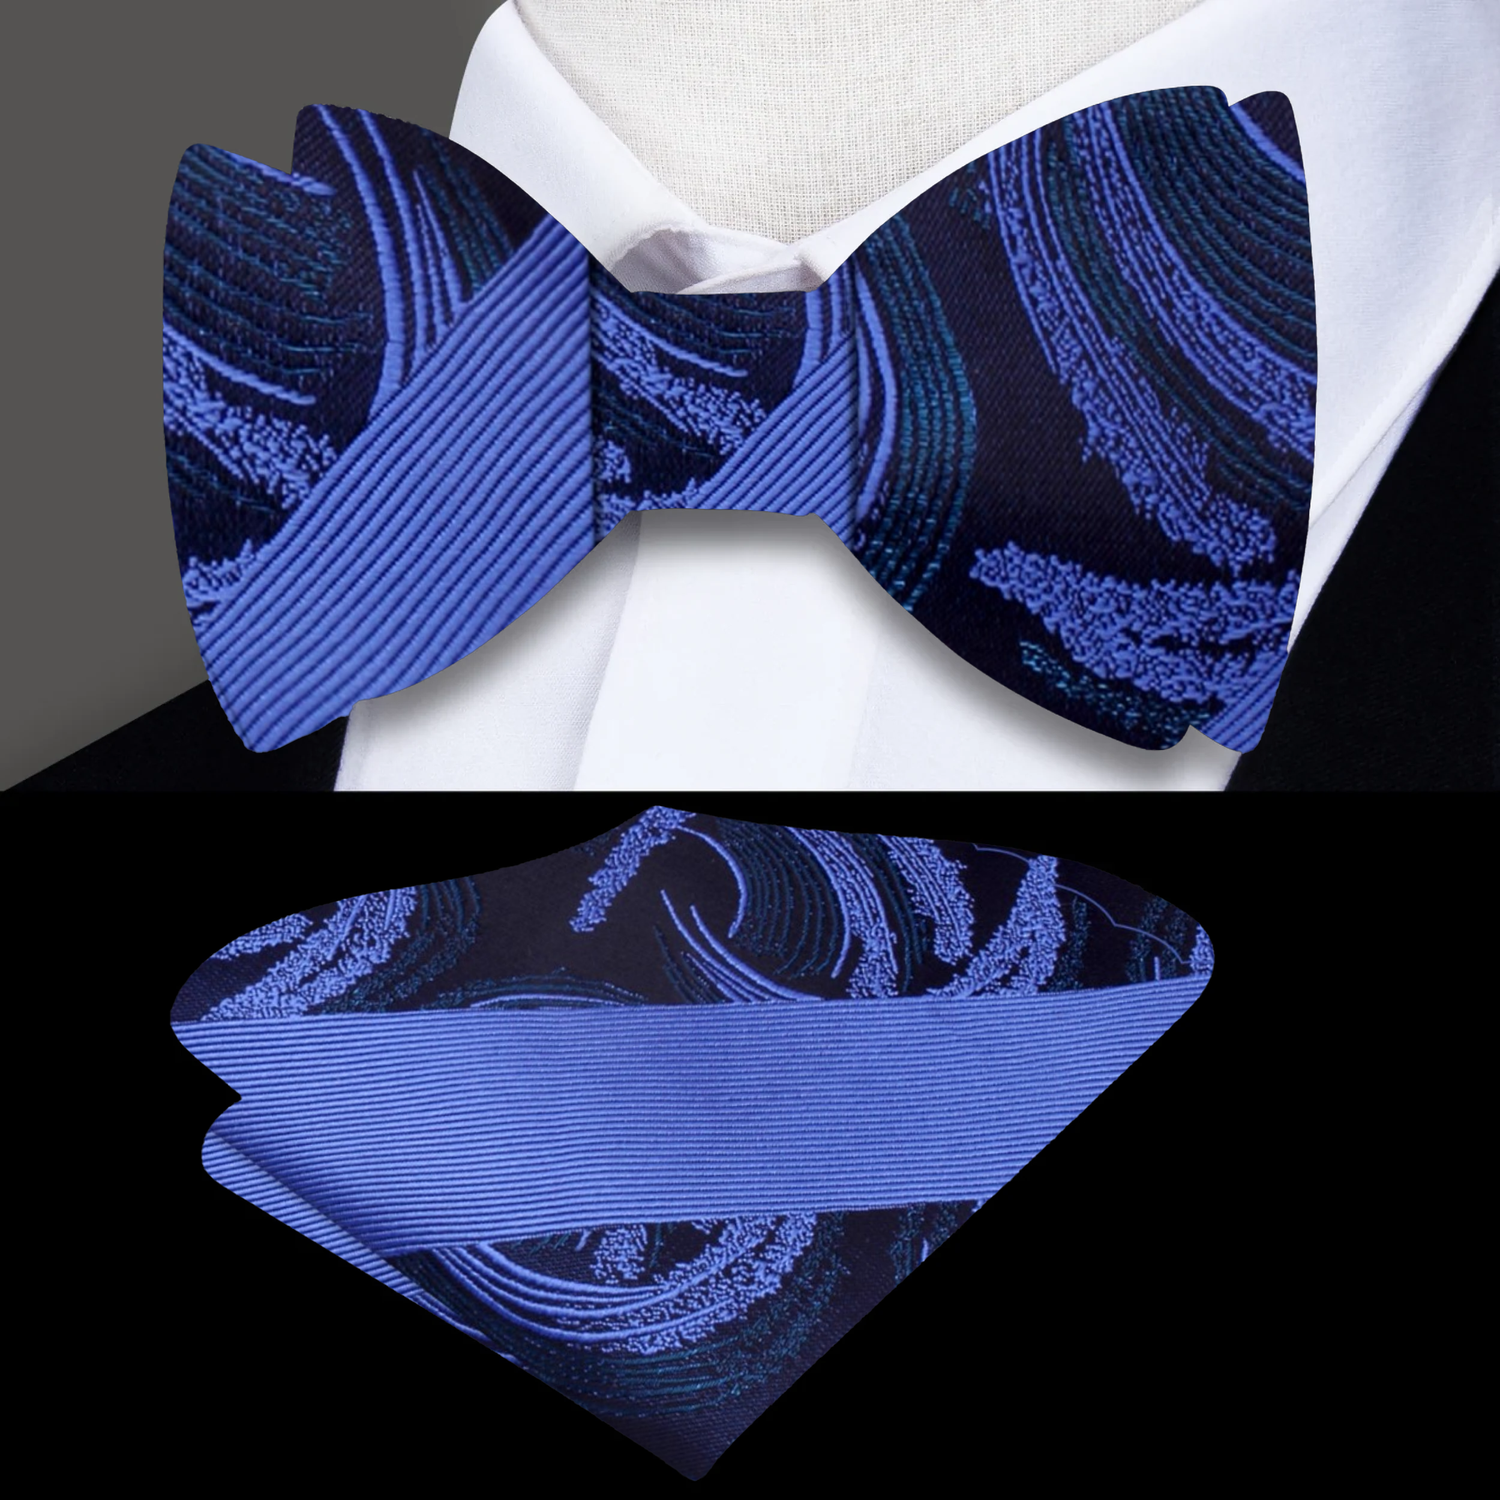 A Blue Abstract Swirl with Thick Stripe Pattern Silk Self Tie Bow Tie, Matching Pocket Square